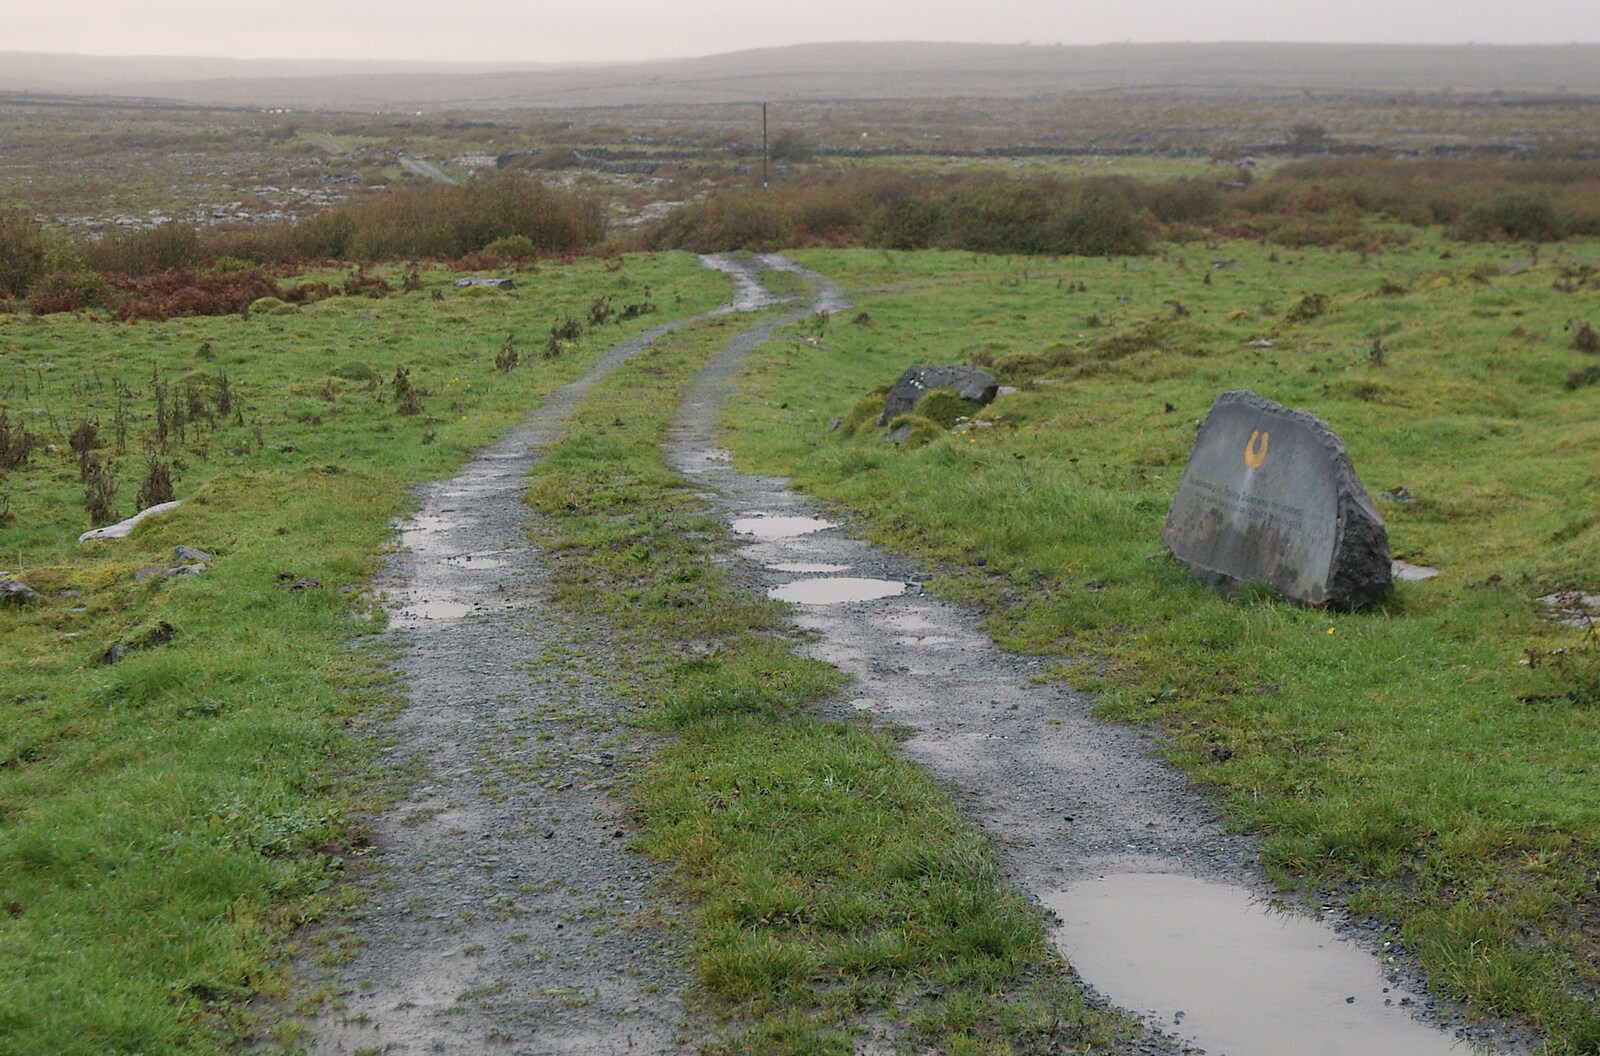 A track runs off to the horizon from Corofin, Ennistymon and The Burran, County Clare, Western Ireland - 27th October 2006